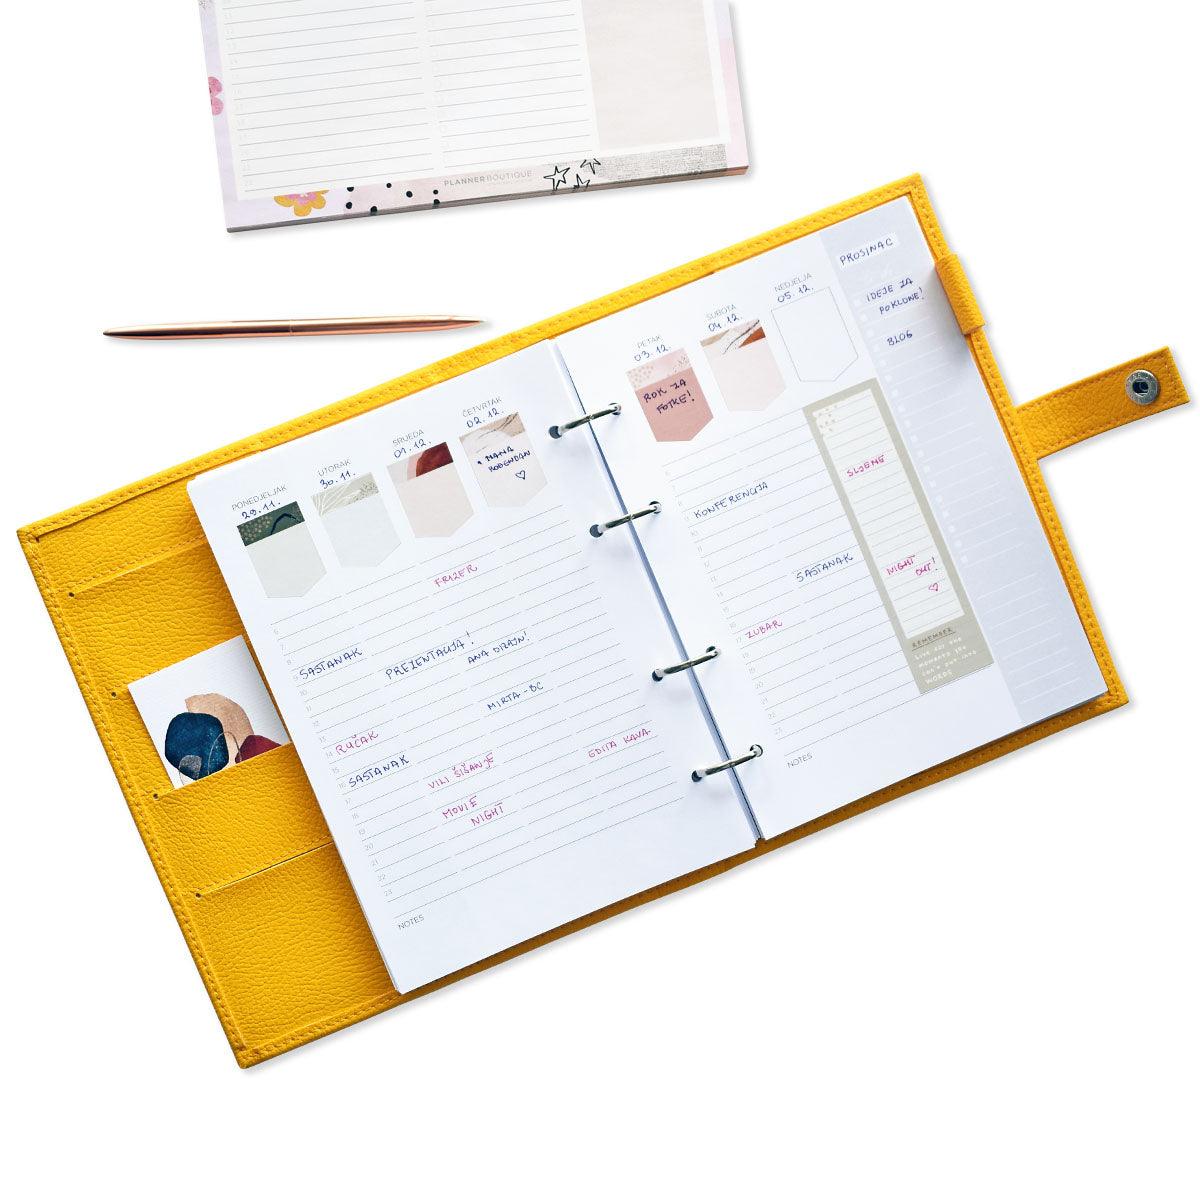 Agenda Yellow Limited - Planner boutique